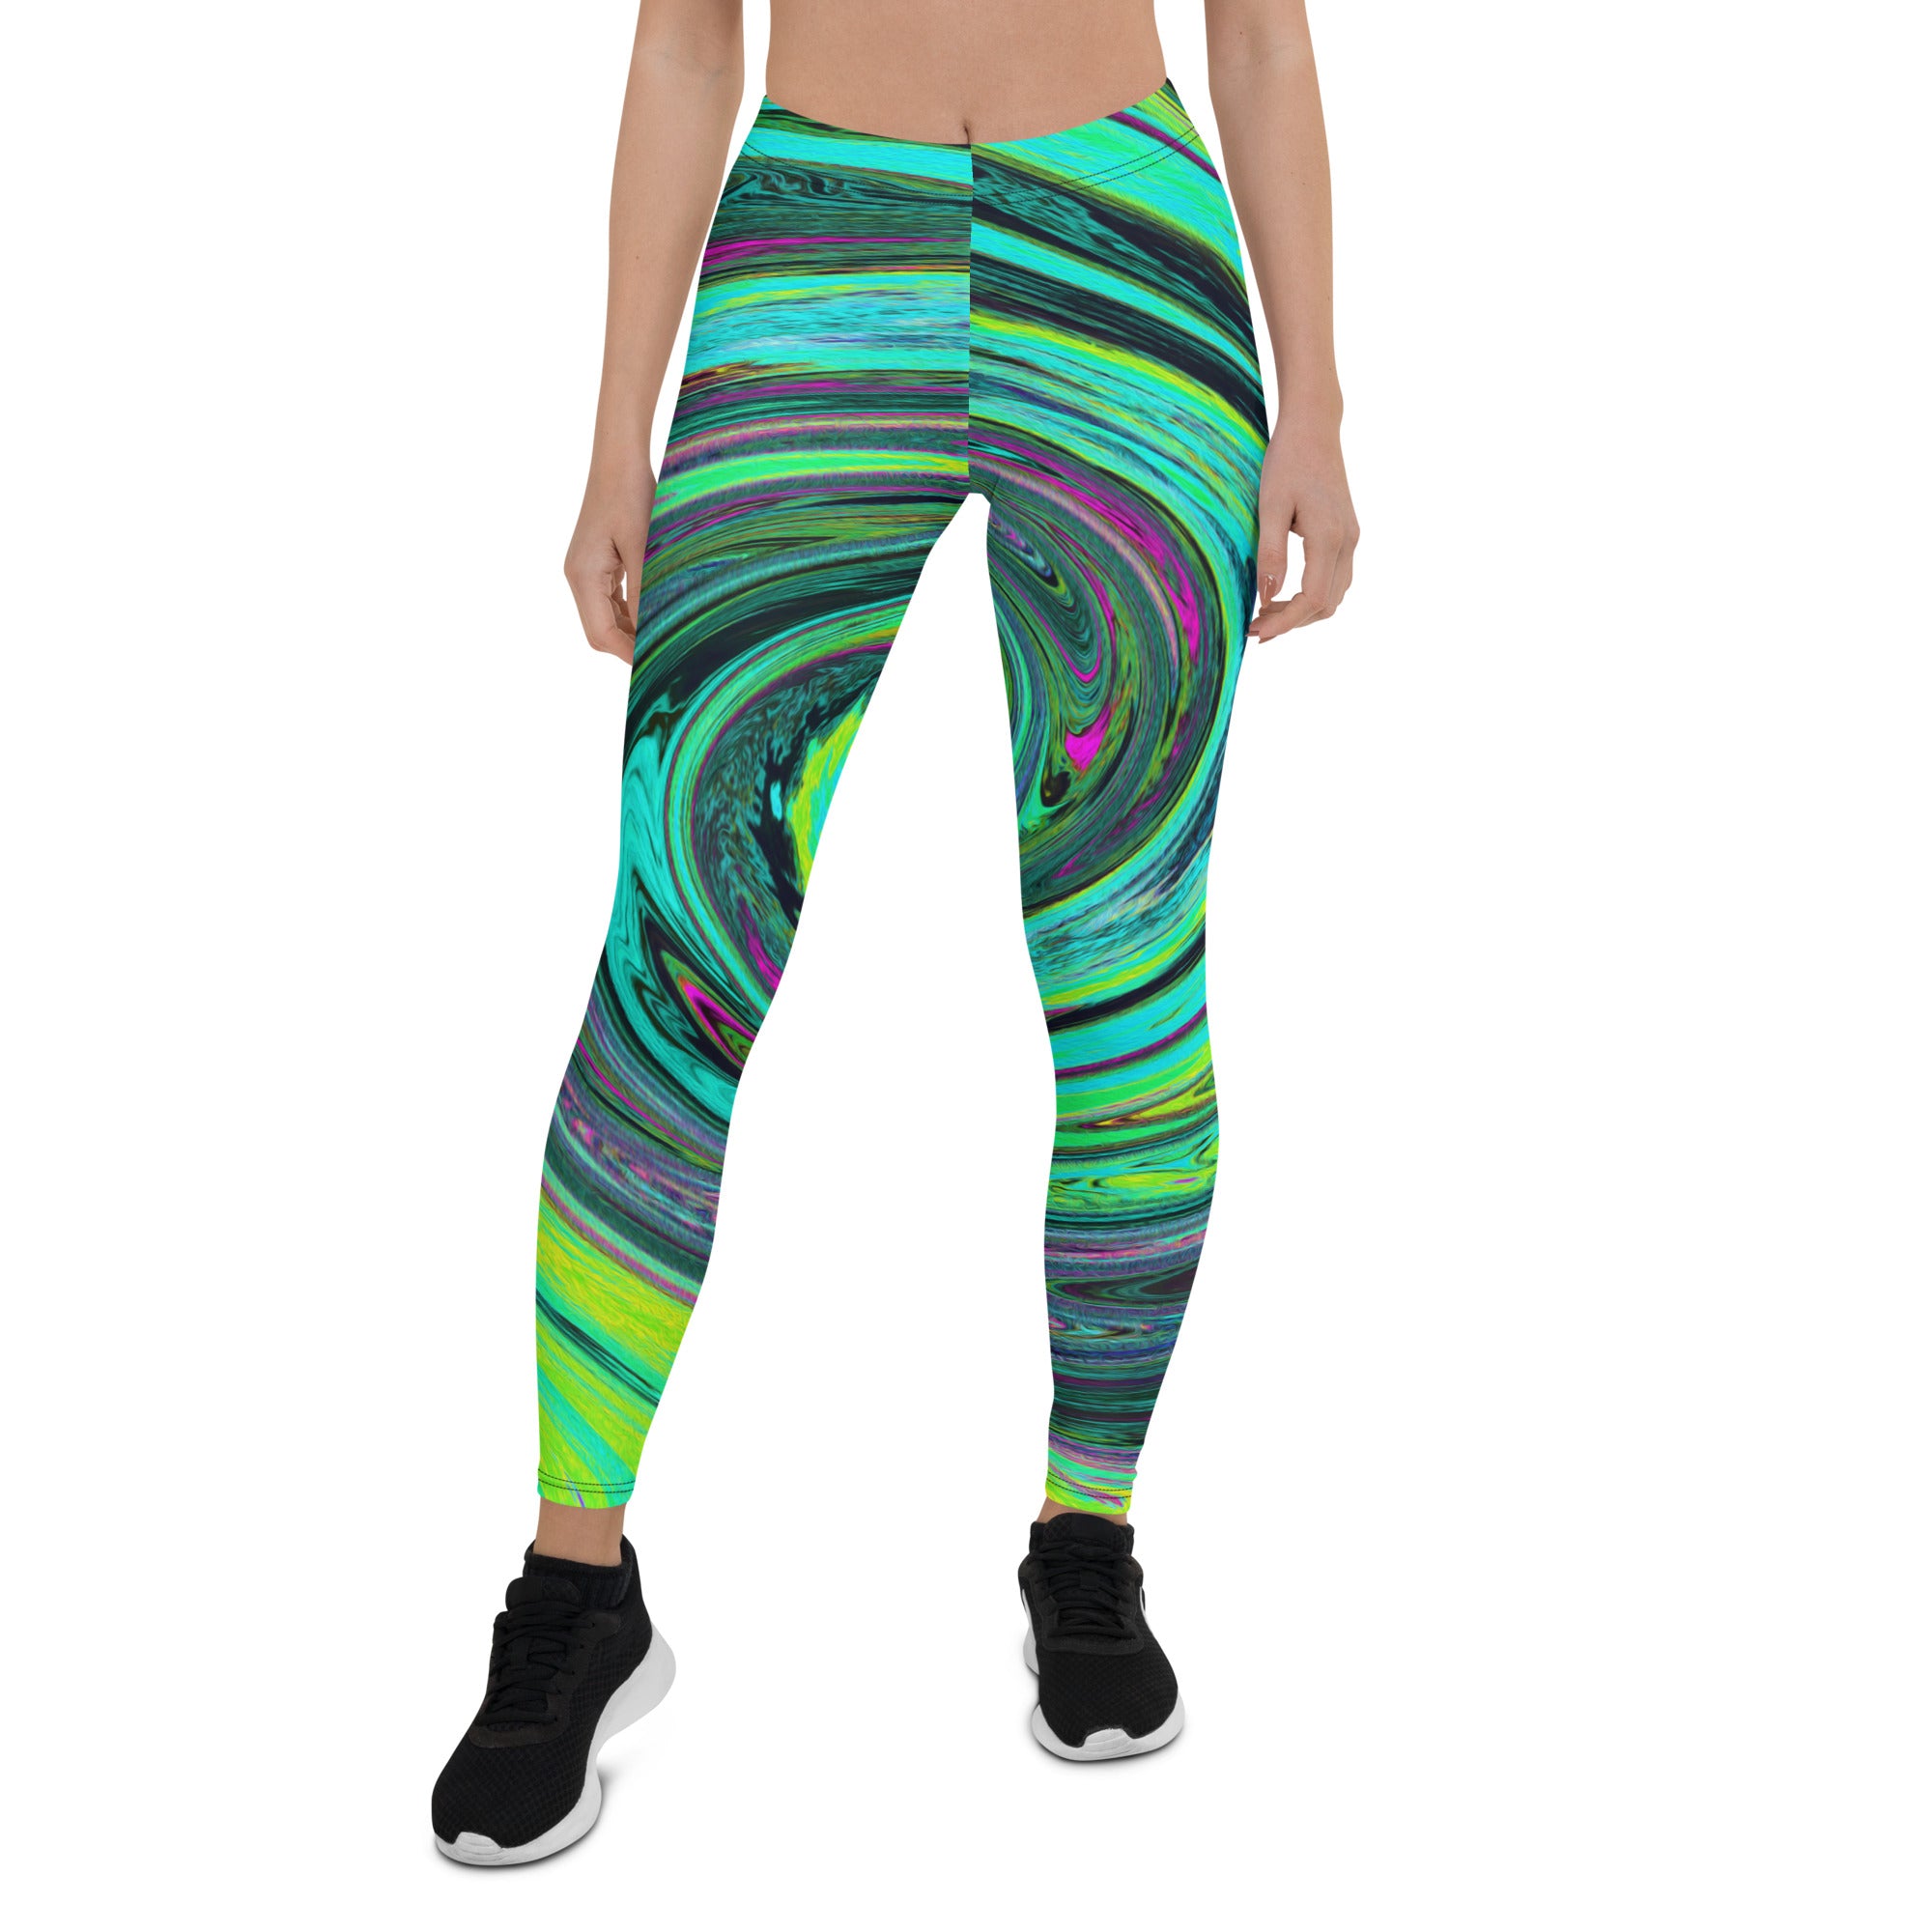 Leggings for Women - Groovy Abstract Retro Green and Magenta Swirl